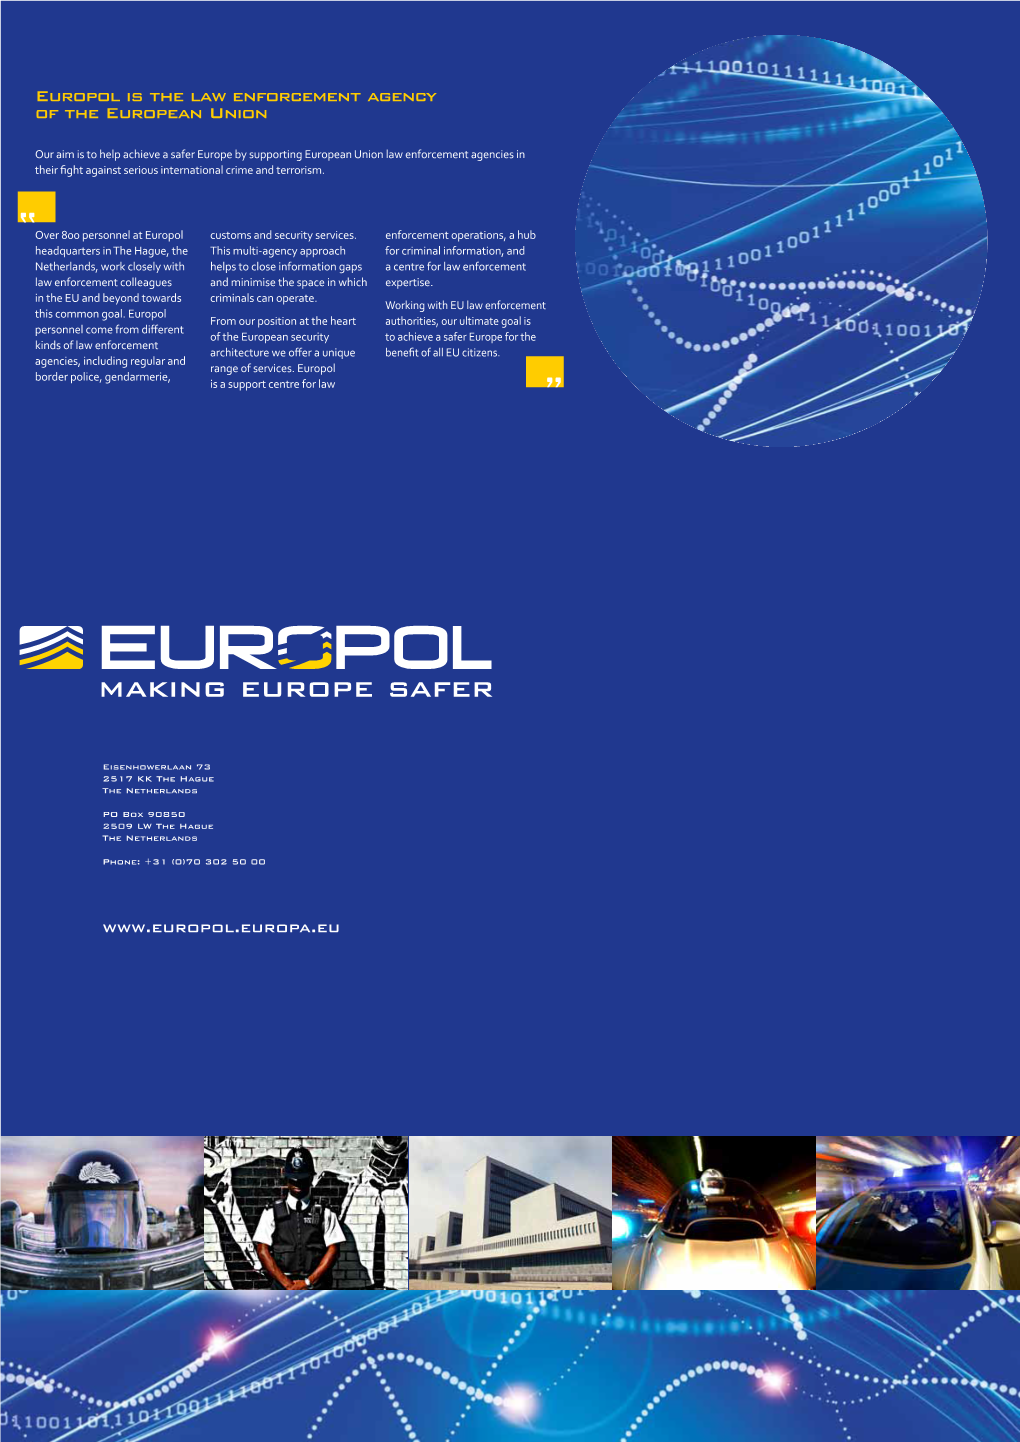 Europol Is the Law Enforcement Agency of the European Union